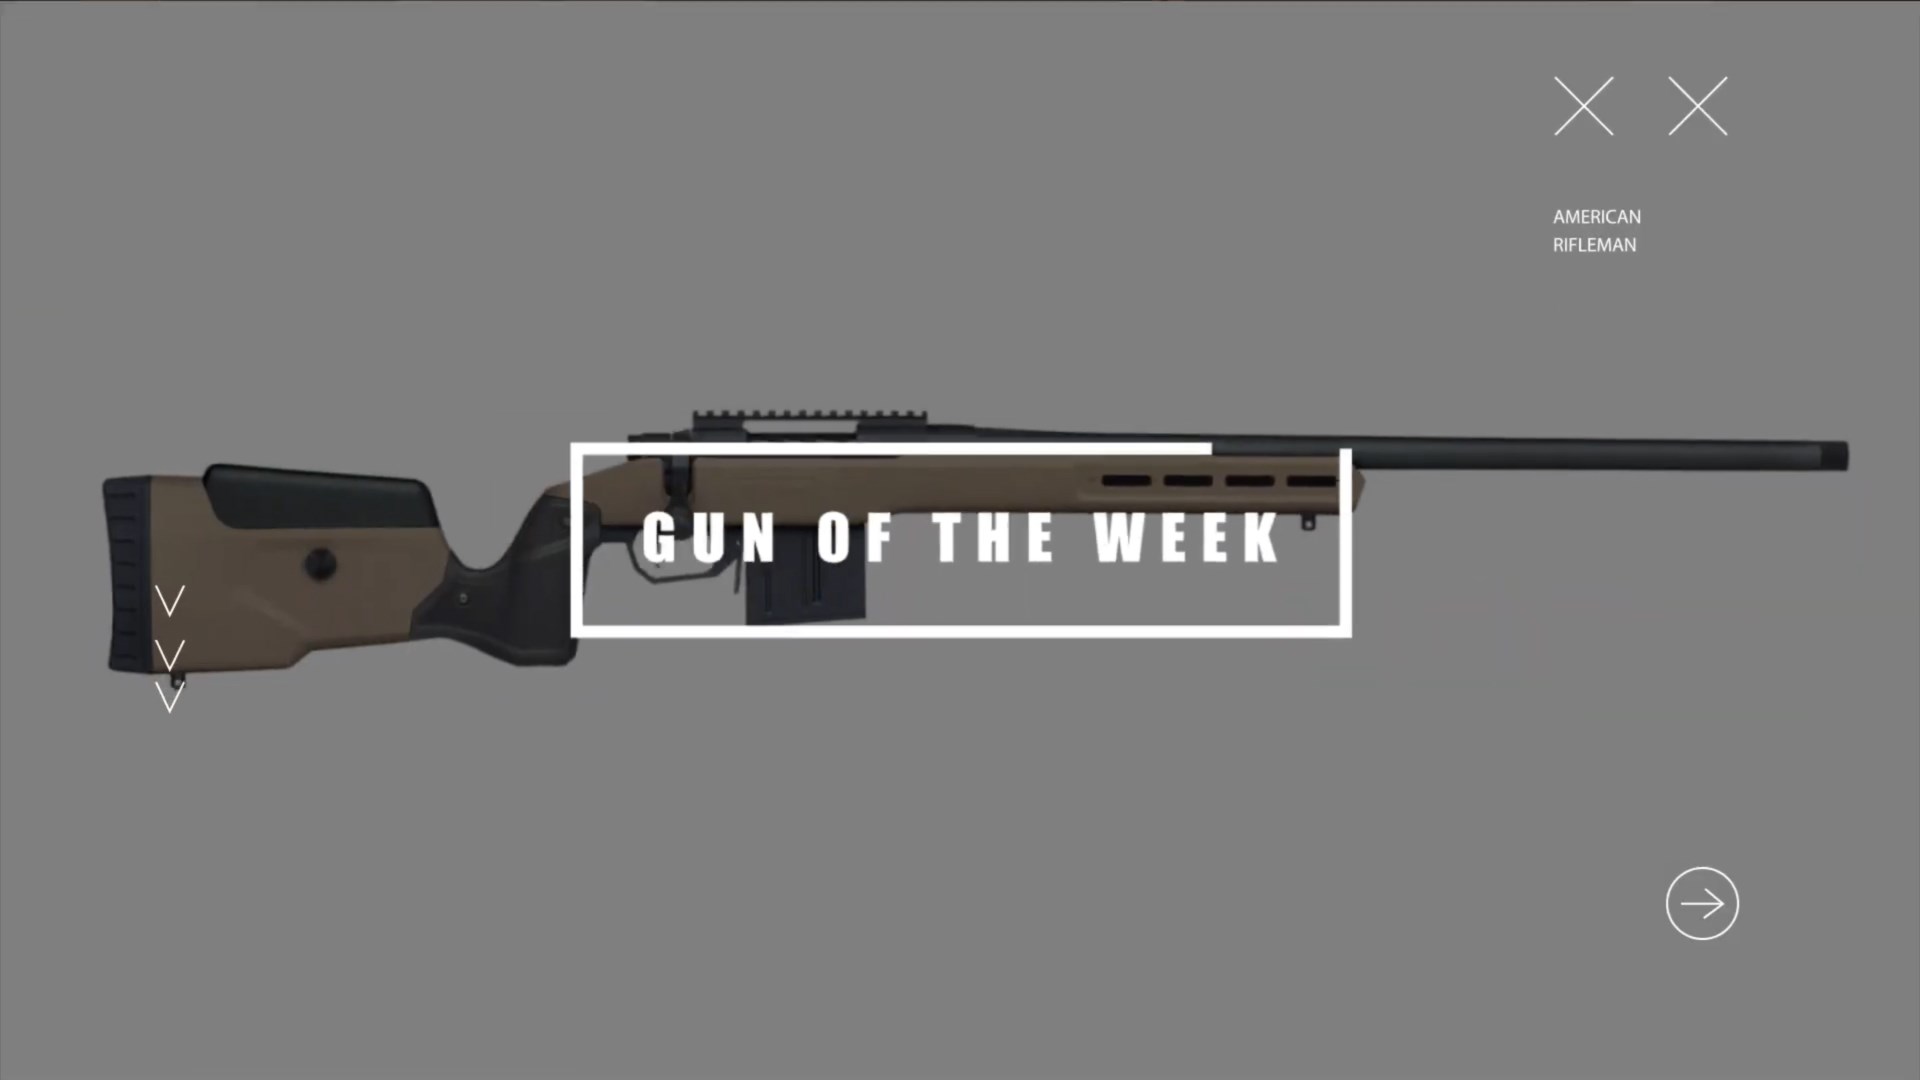 GUN OF THE WEEK text box title screen overlay right-side view Mossberg Patriot LR Tactical bolt-action rifle flat dark earth MDT stock background AMERICAN RIFLEMAN text arrow XX